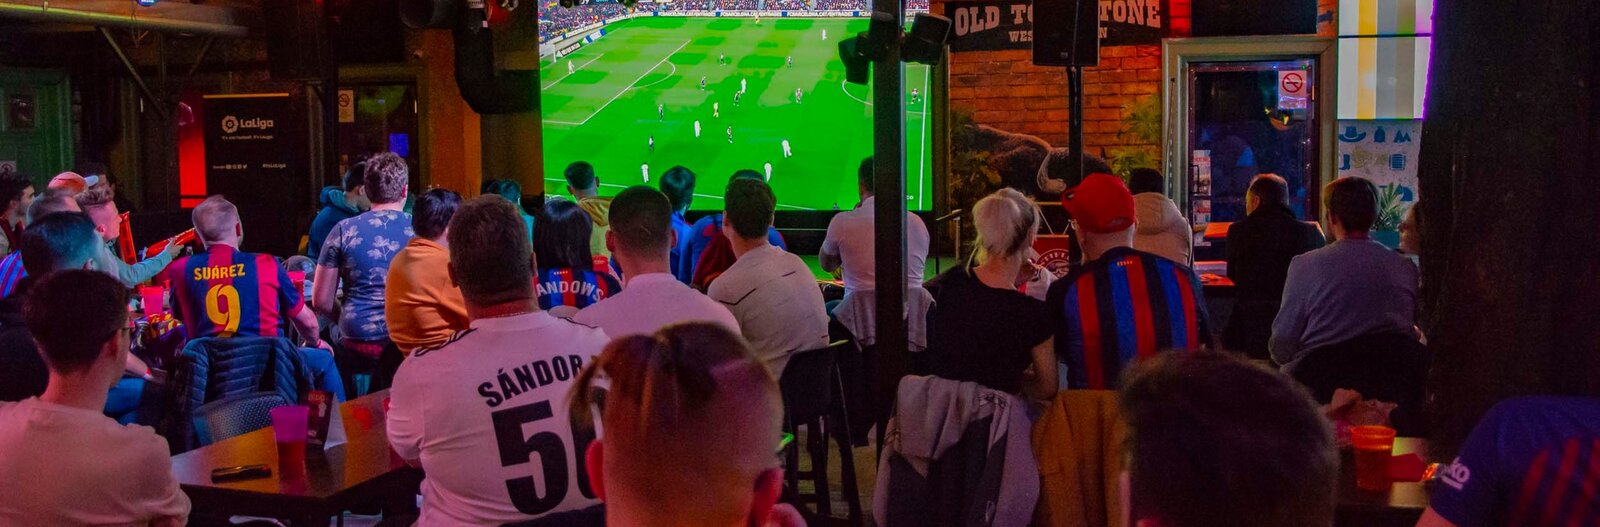 Score Big – 10 sports bars and pubs for watching football matches